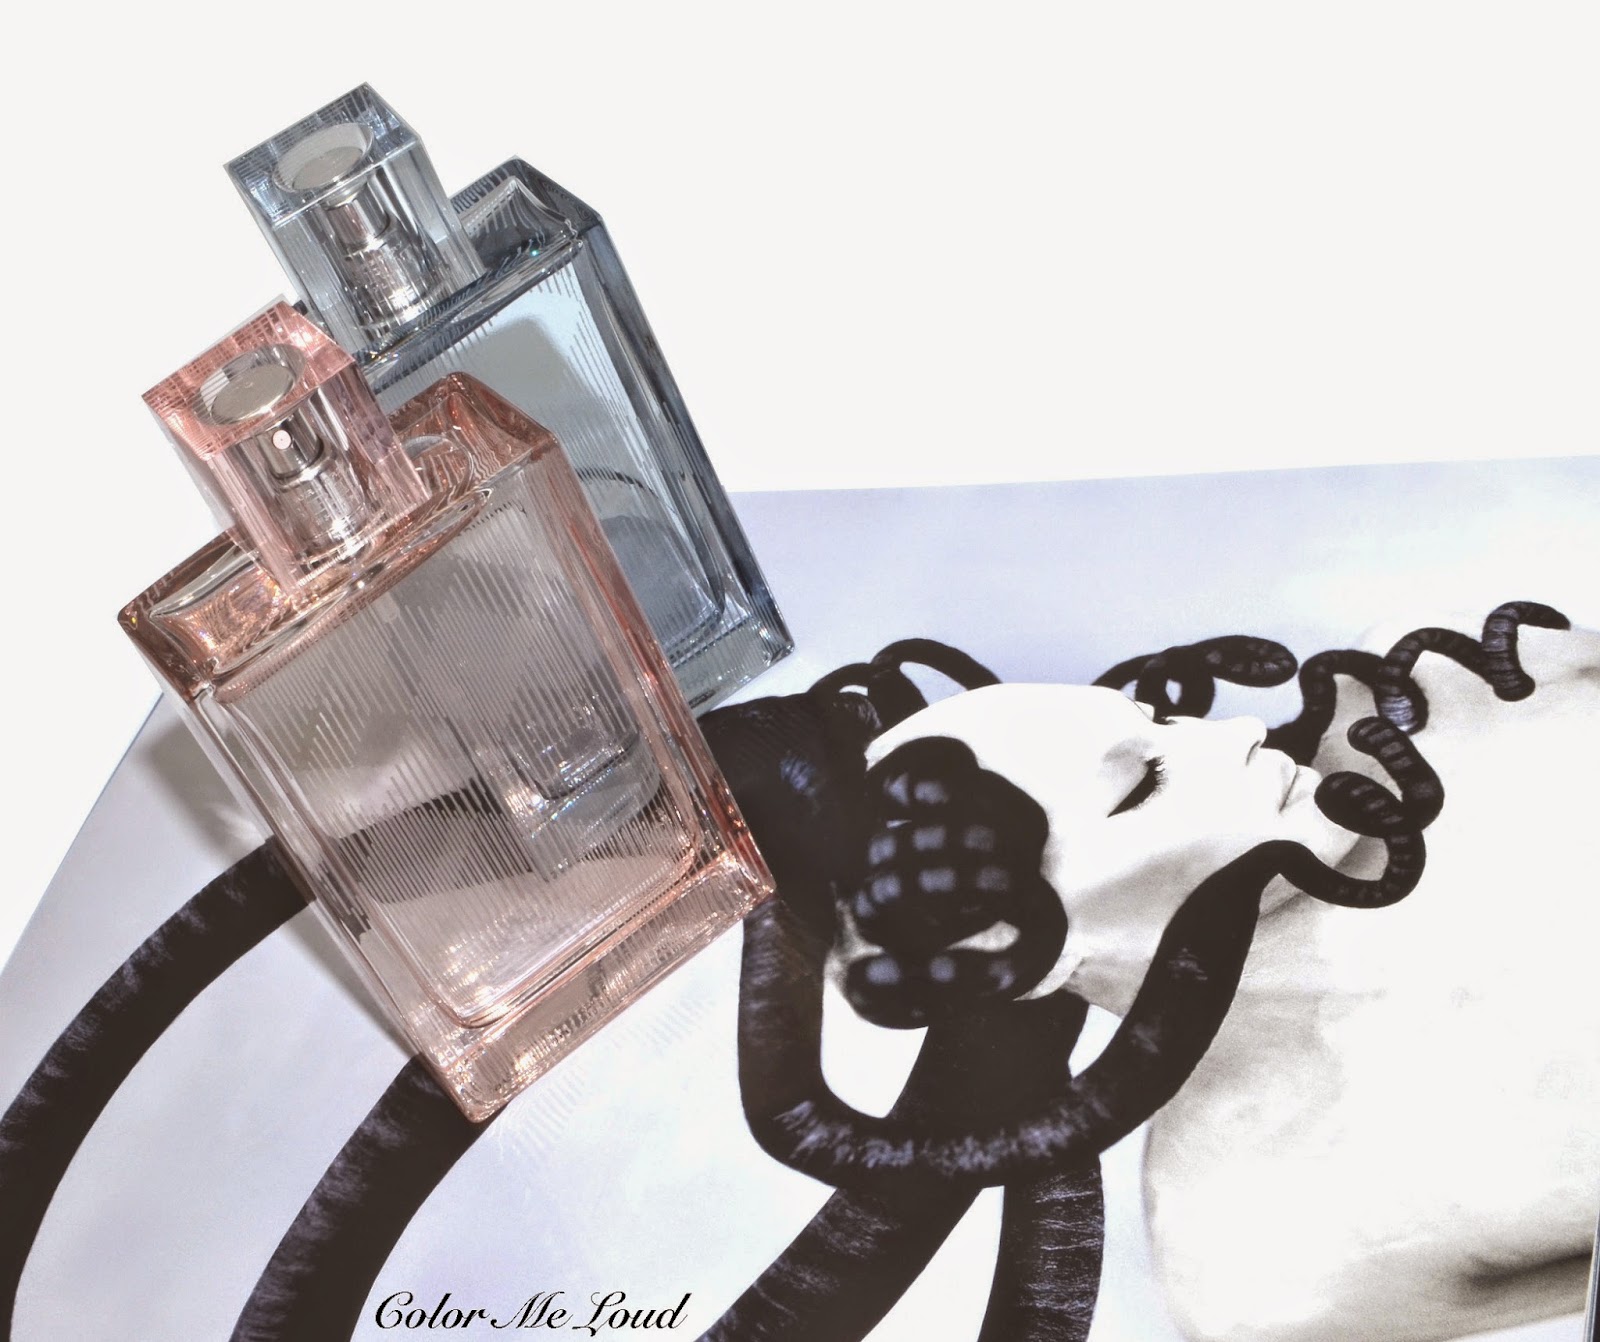 Review Loud EdT, Brit Me Him, Brit For Sheer Color Splash Burberry Burberry For Her, |